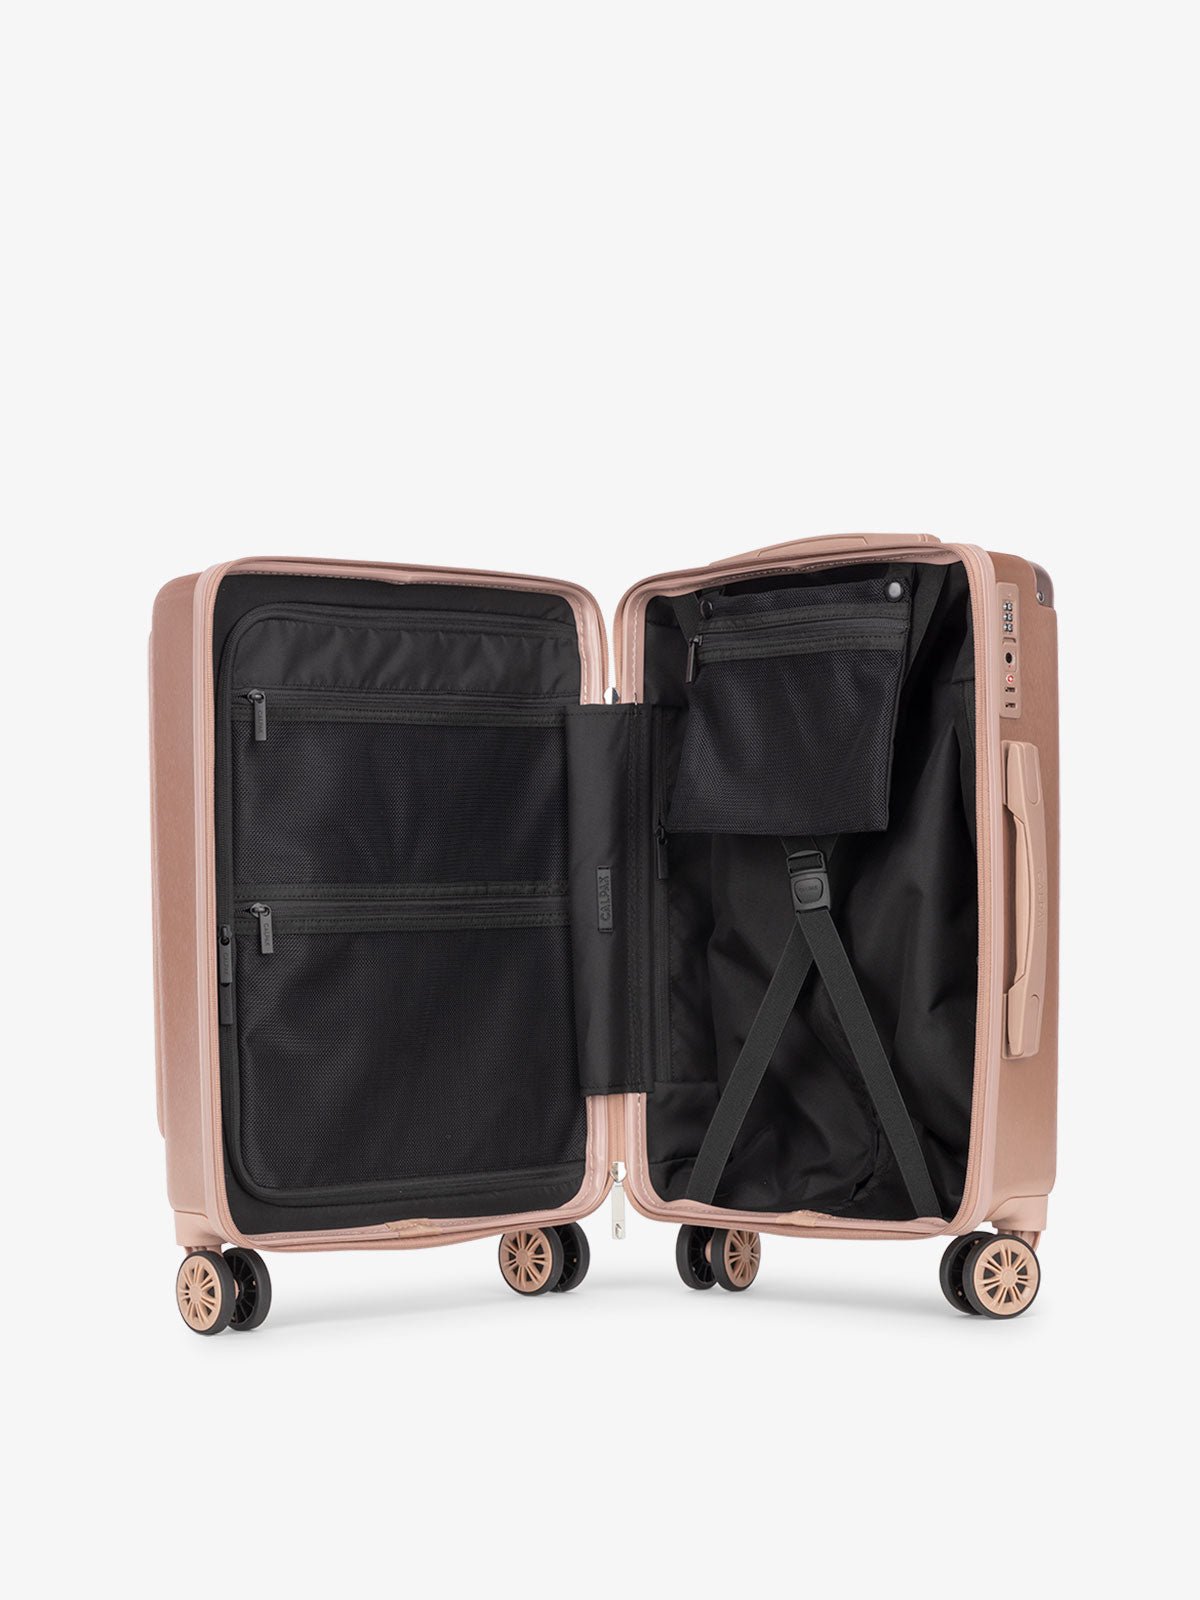 CALPAK Ambeur hard shell carry-on luggage with front pocket for laptop, TSA lock and divider with multiple pockets and compression strap in rose gold